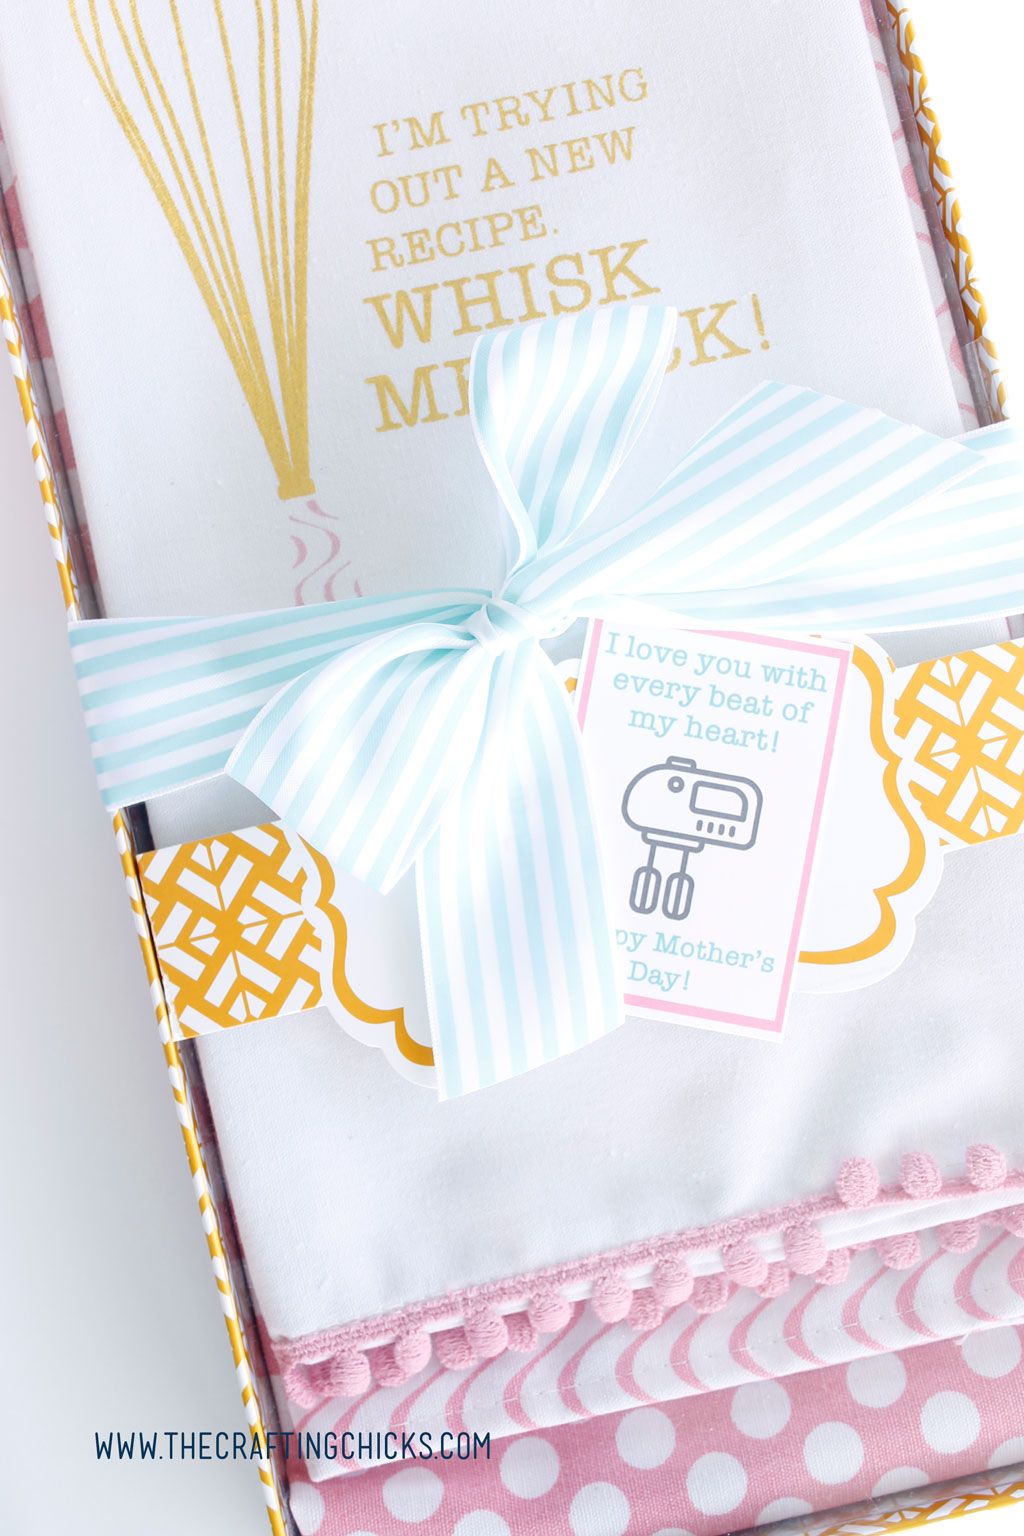 Grab your cute ribbon and tie a bow on the gift set. Then add your cute Retro Mother's Day Tags to each gift.